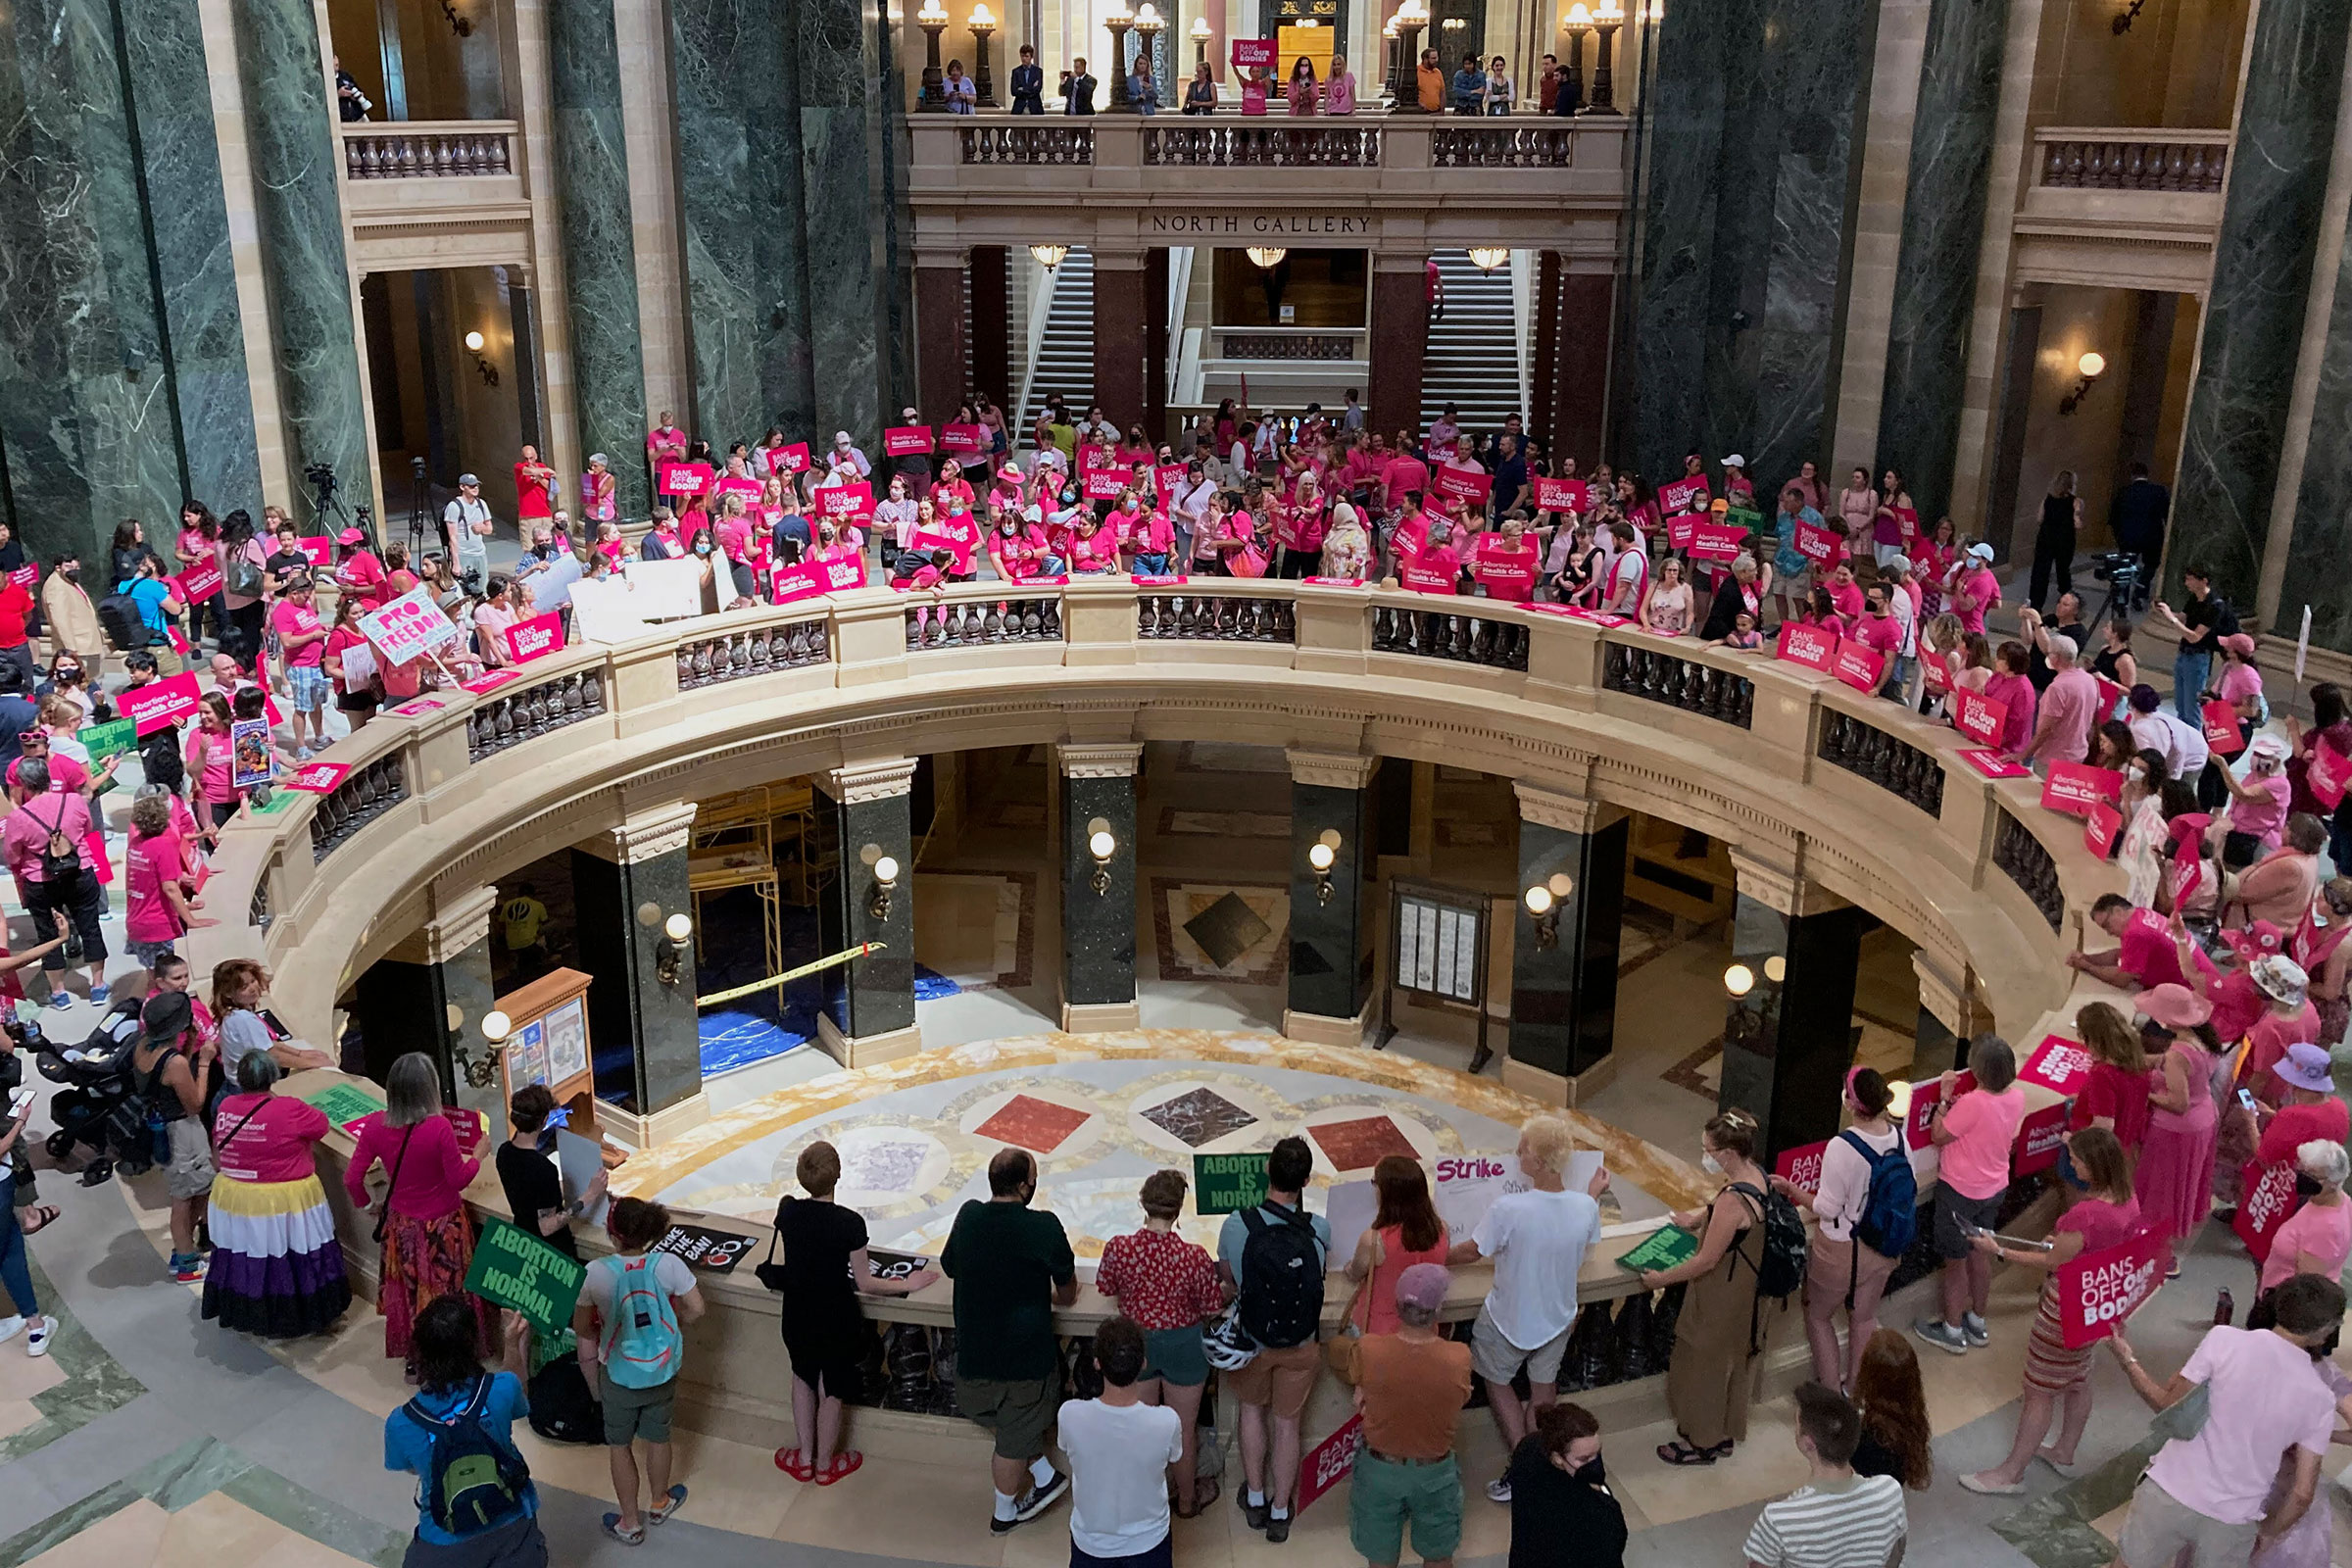 Dozens of protesters gather in the Wisconsin state Capitol rotunda in Madison, Wis., on June 22, 2022, in hopes of convincing Republican lawmakers to repeal the state's 173-year-old ban on abortions.